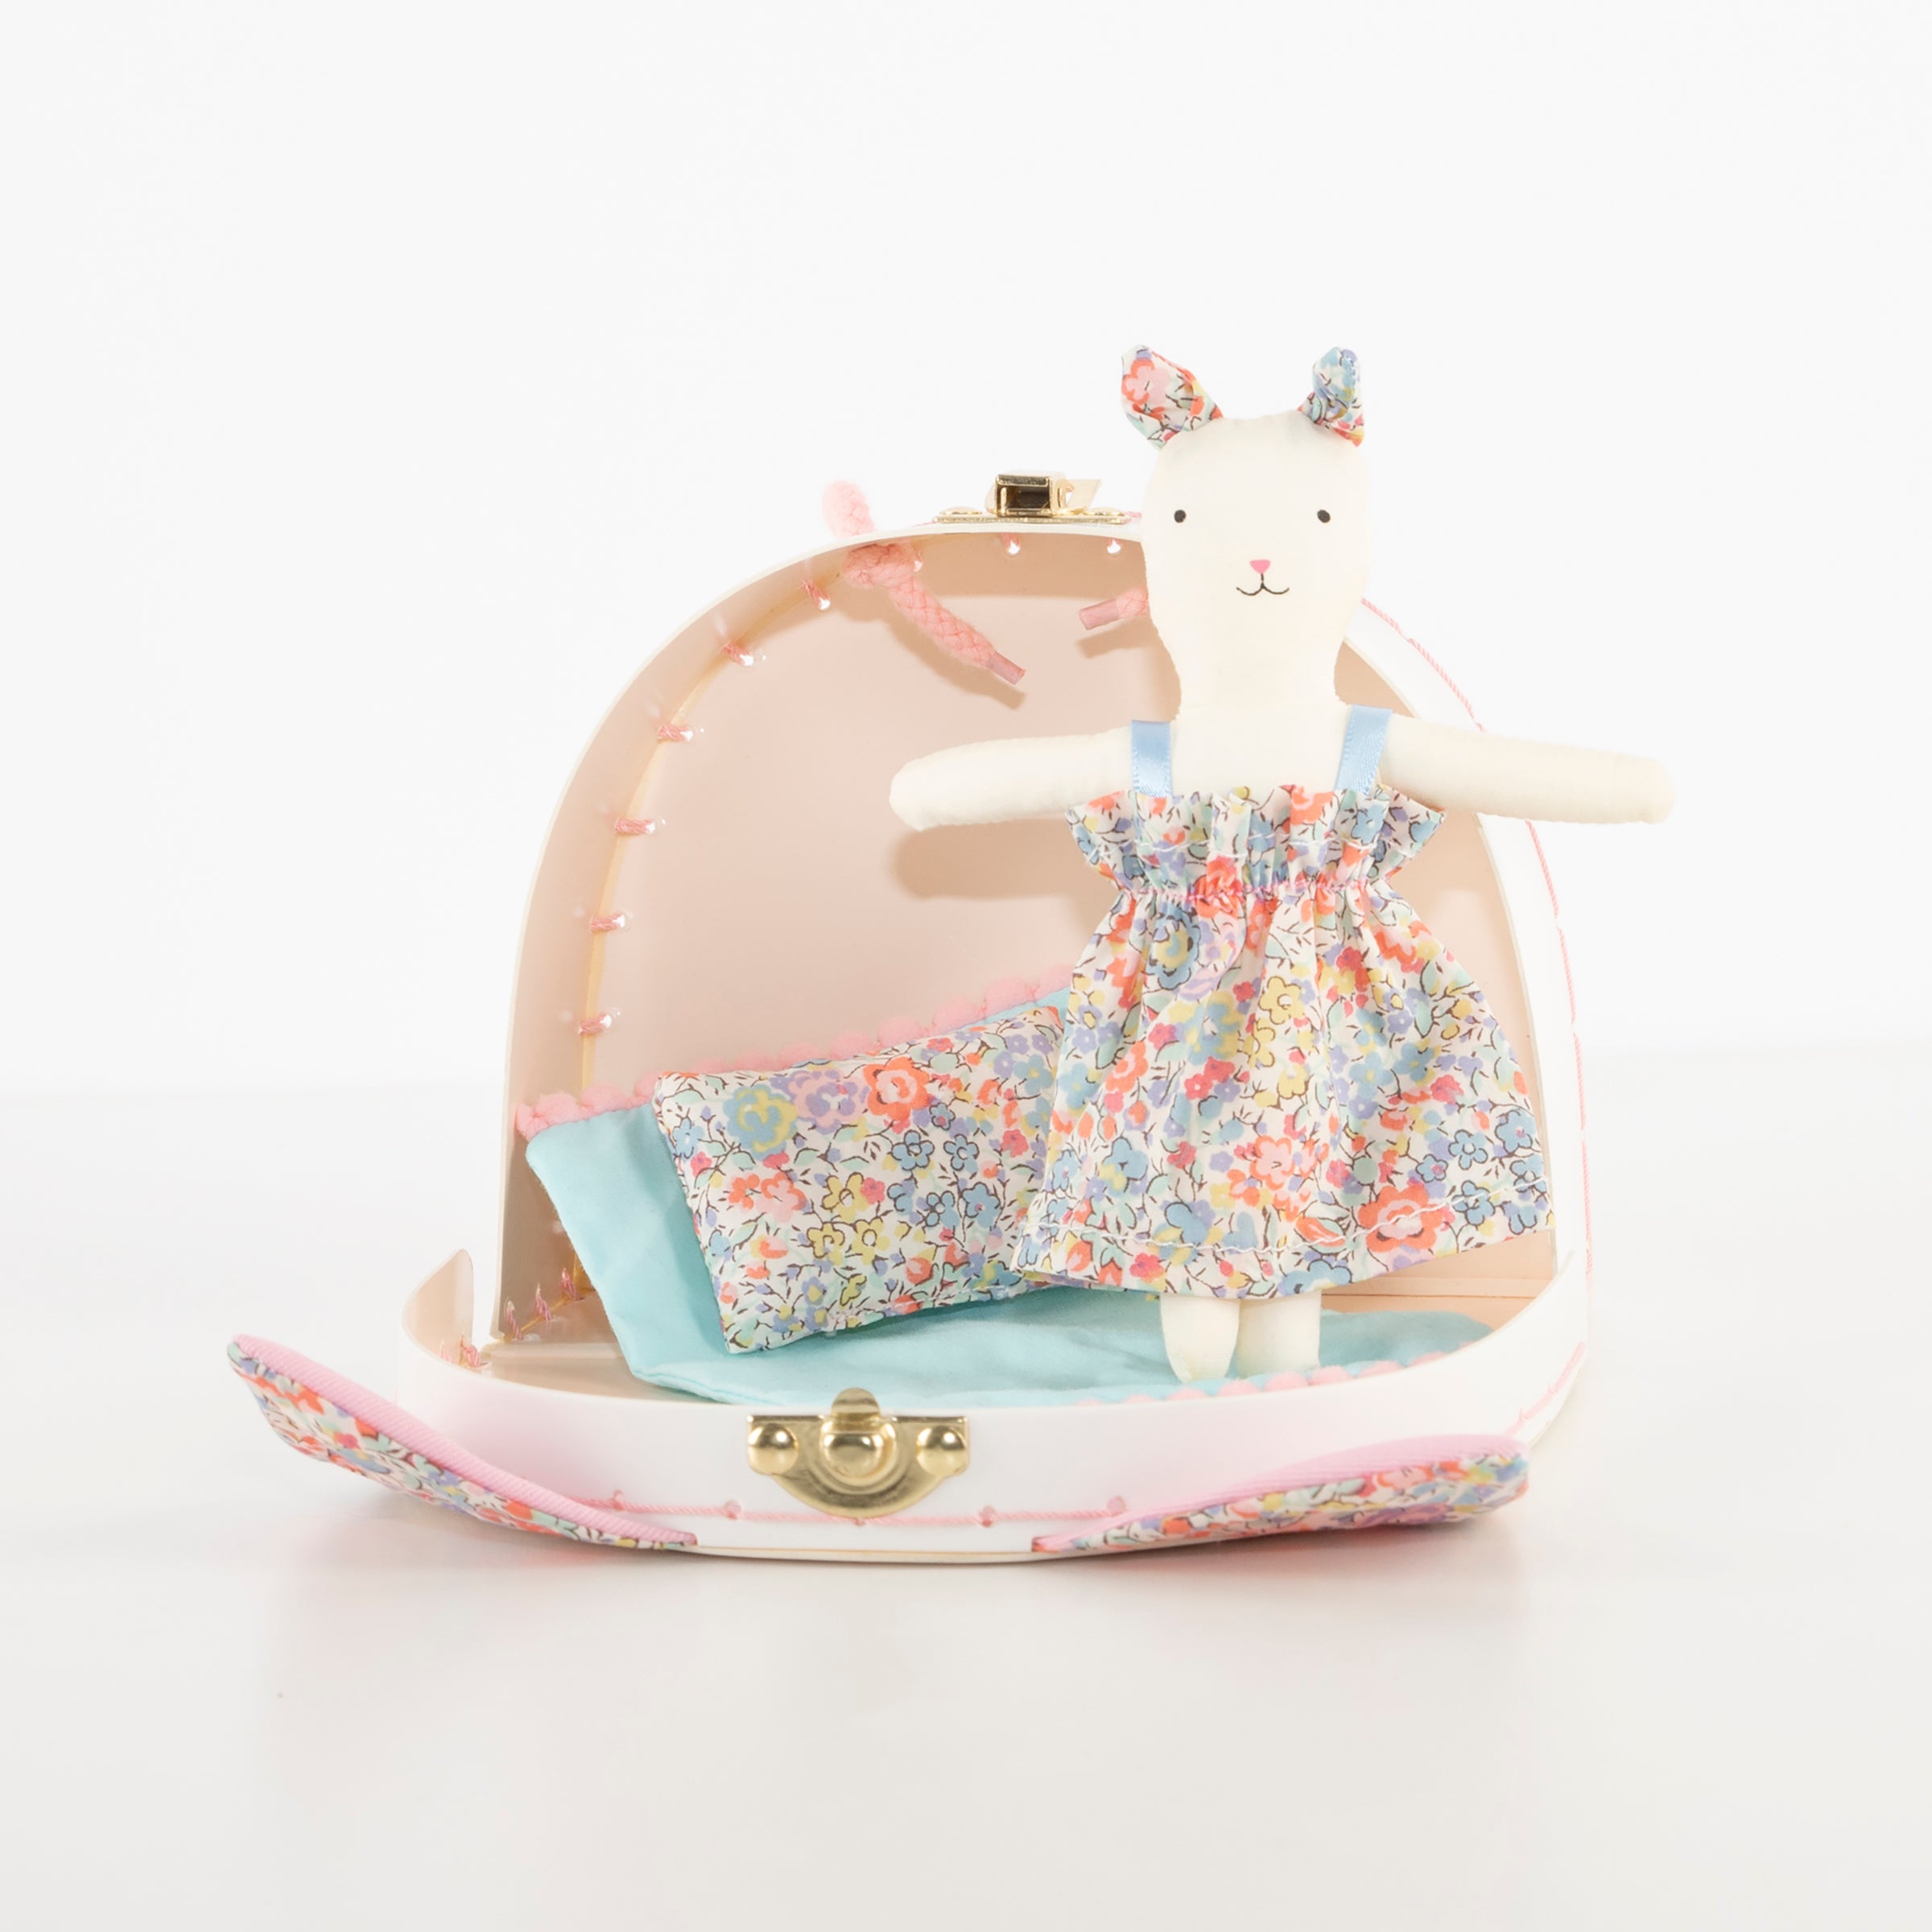 Our fabric doll and accessories, all contained in a little suitcase, is perfect to use as travel toys.